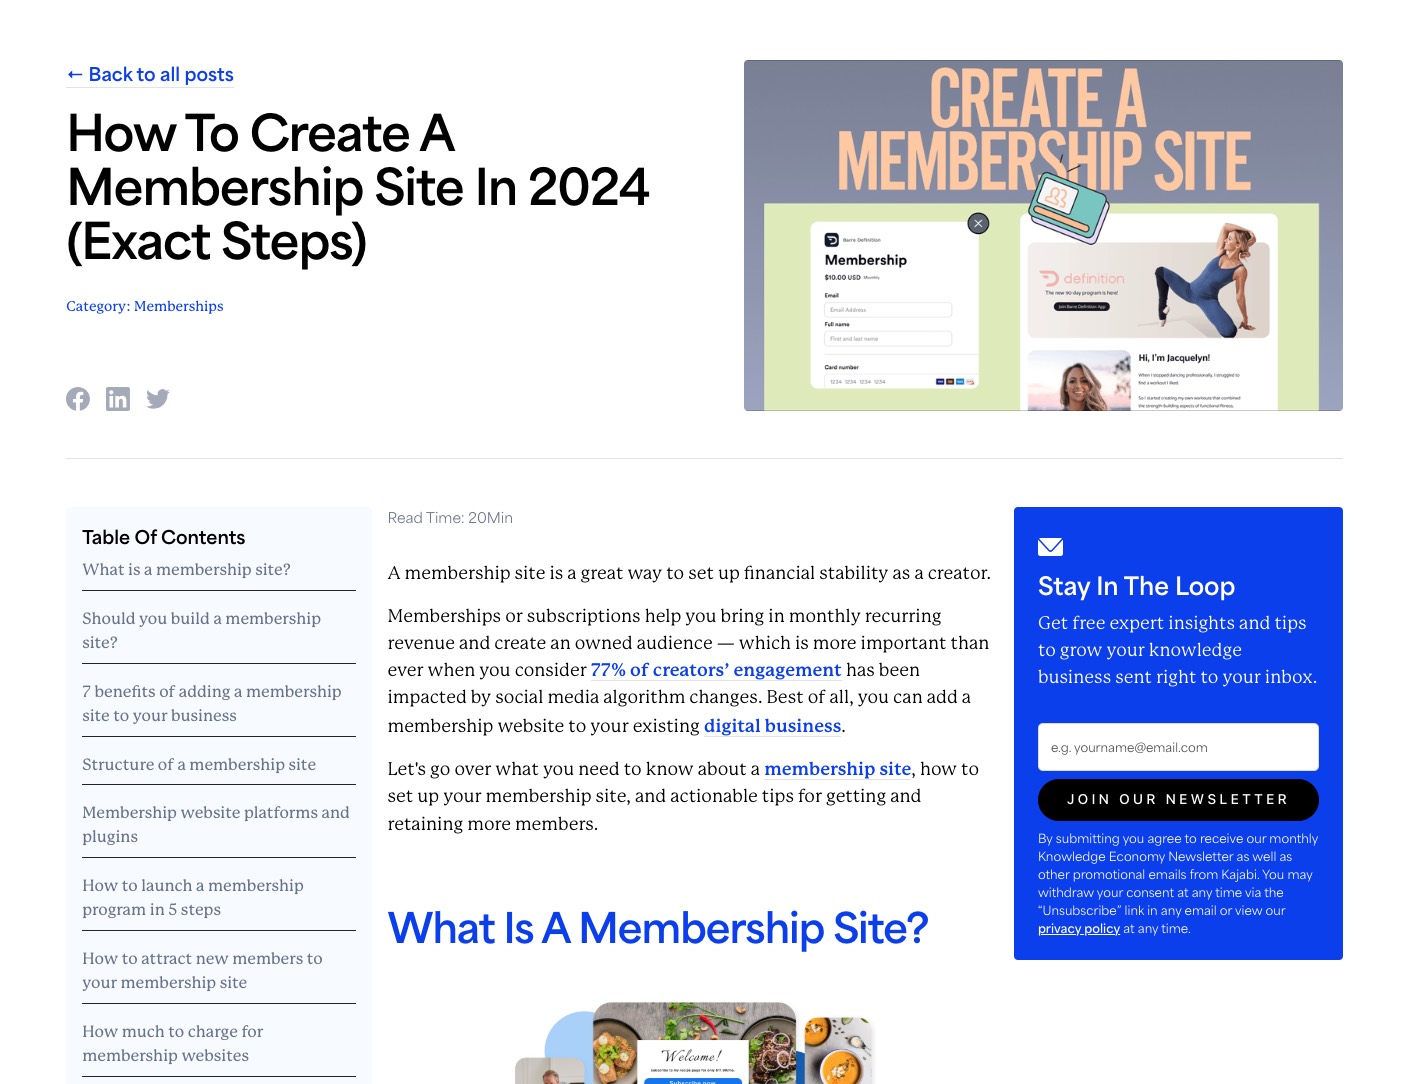 A section of Kajabi's post on "How To Create A Membership Site In 2024 (Exact Steps)"